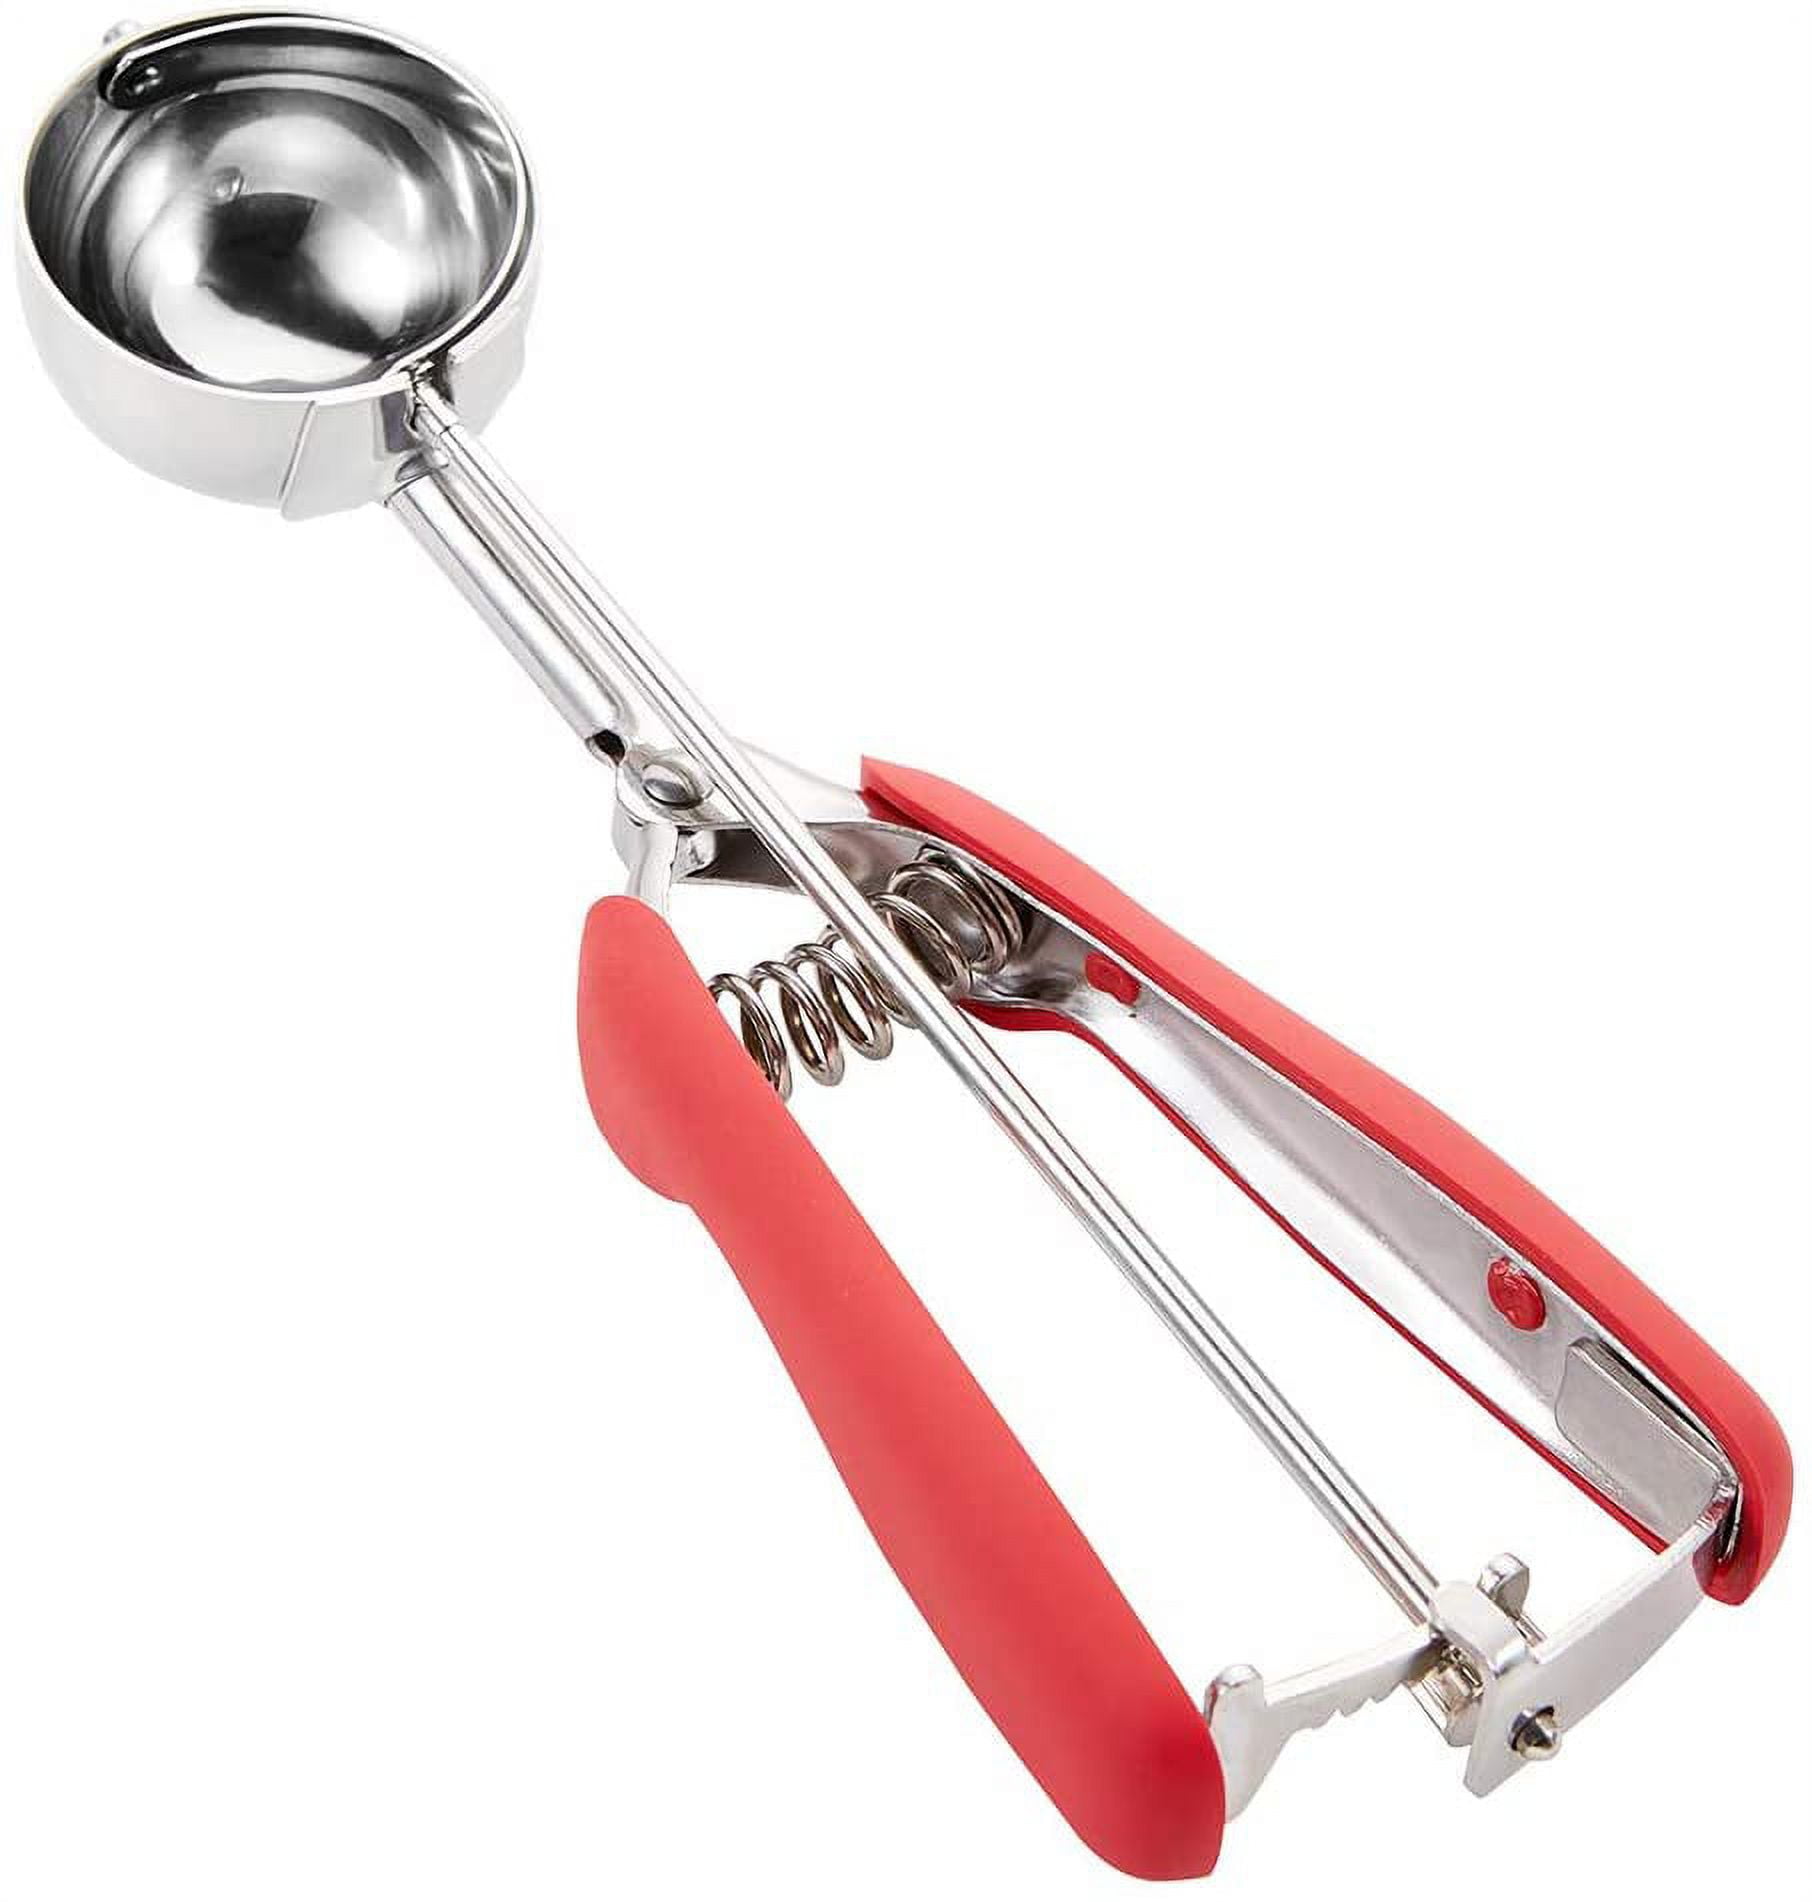 Large Cookie Scoop. 3 Tbsp Cookie Scoop for Baking, Cookie Dough Scoop,  Cupcake Scoop, 2 3/32 inches / 53 mm Ball, 18/8 Stainless Steel, Secondary